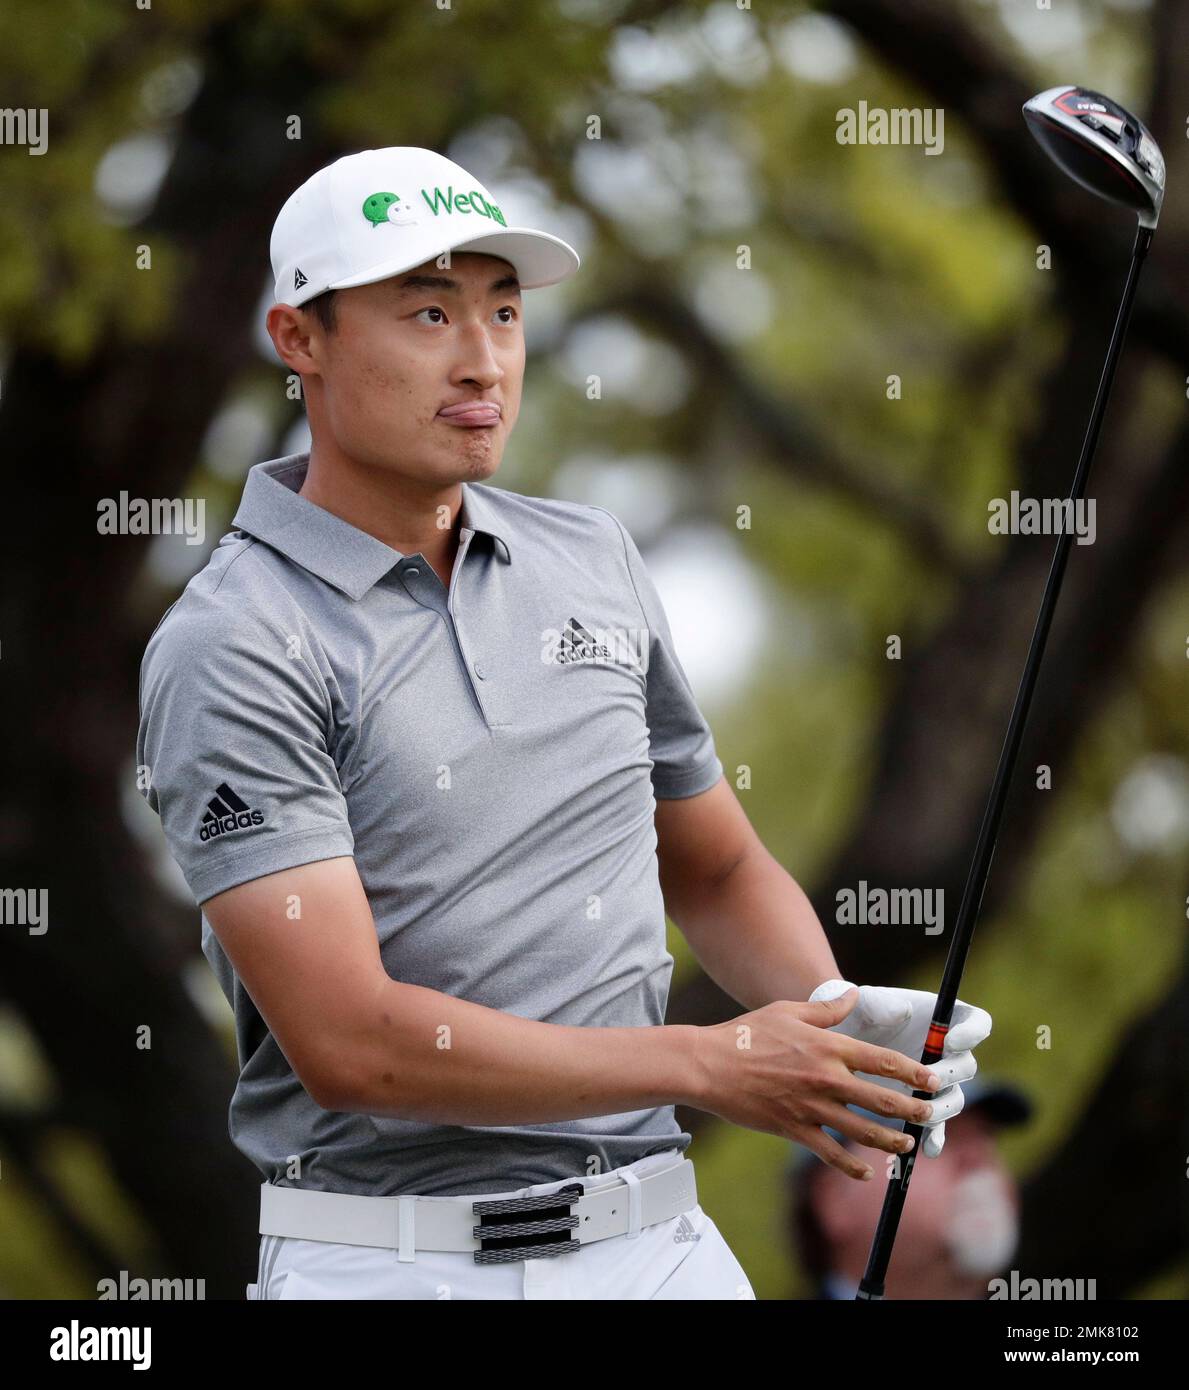 Hao Tong Li watch his drive on the first hole during fourth round play at the Dell Technologies Match Play Championship golf tournament, Saturday, March 30, 2019, in Austin, Texas